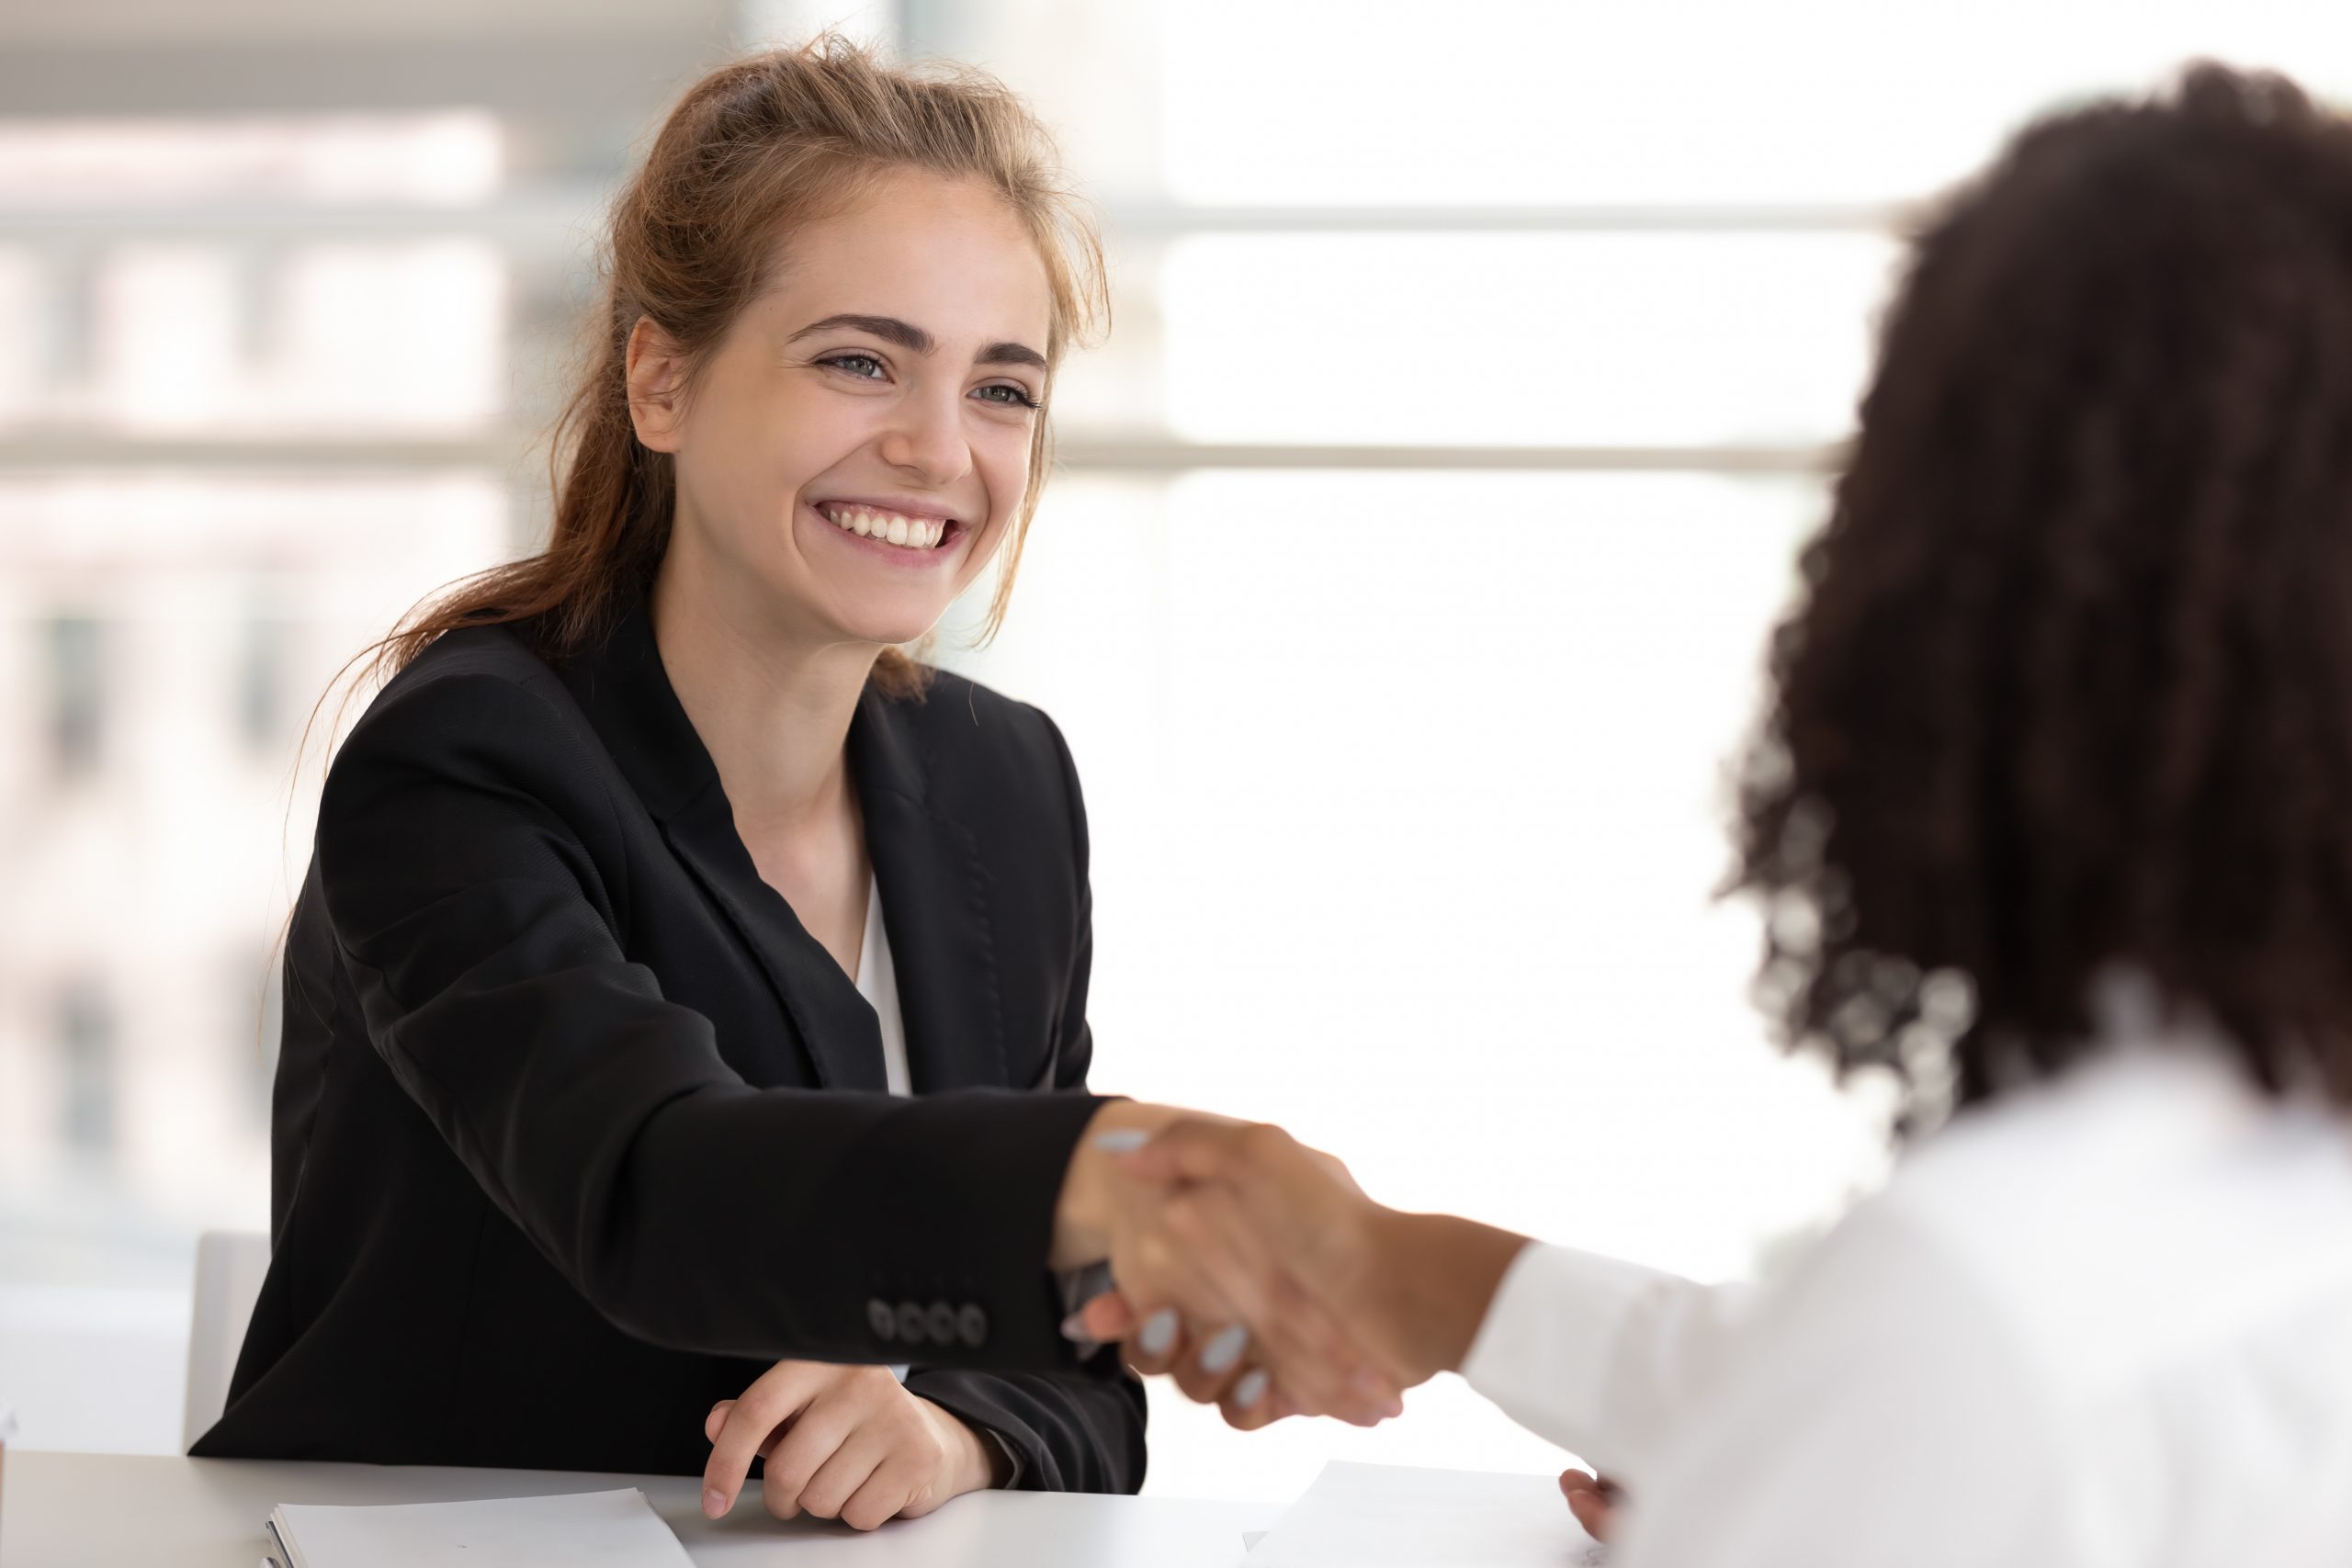 Happy businesswoman hr manager handshake hire candidate selling insurance services making good first impression, diverse broker and client customer shake hand at business office meeting job interview